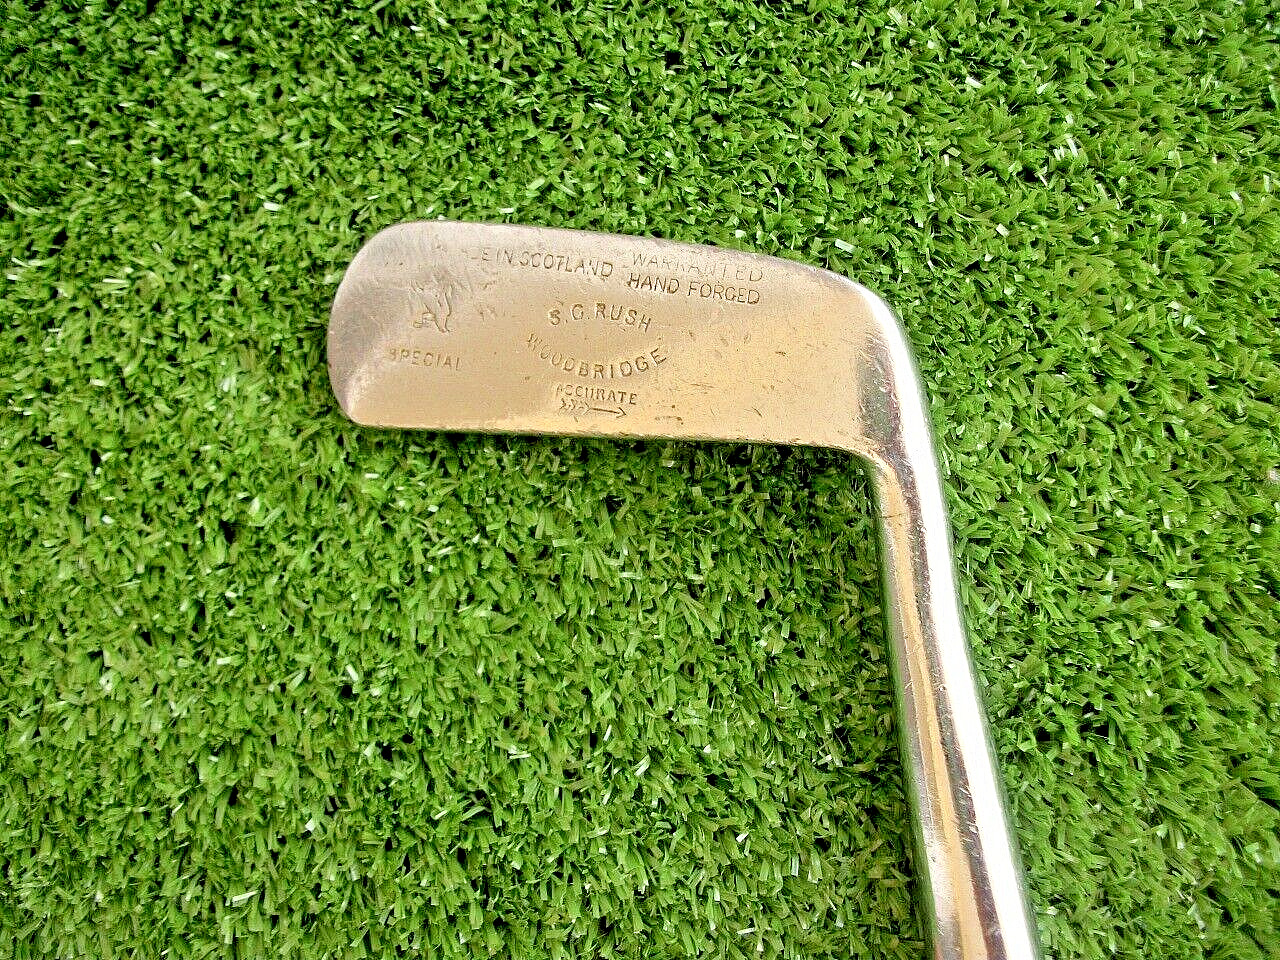 S. C. Rush Woodbridge Accurate Special Putter Made in Scotland Hickory Shaft